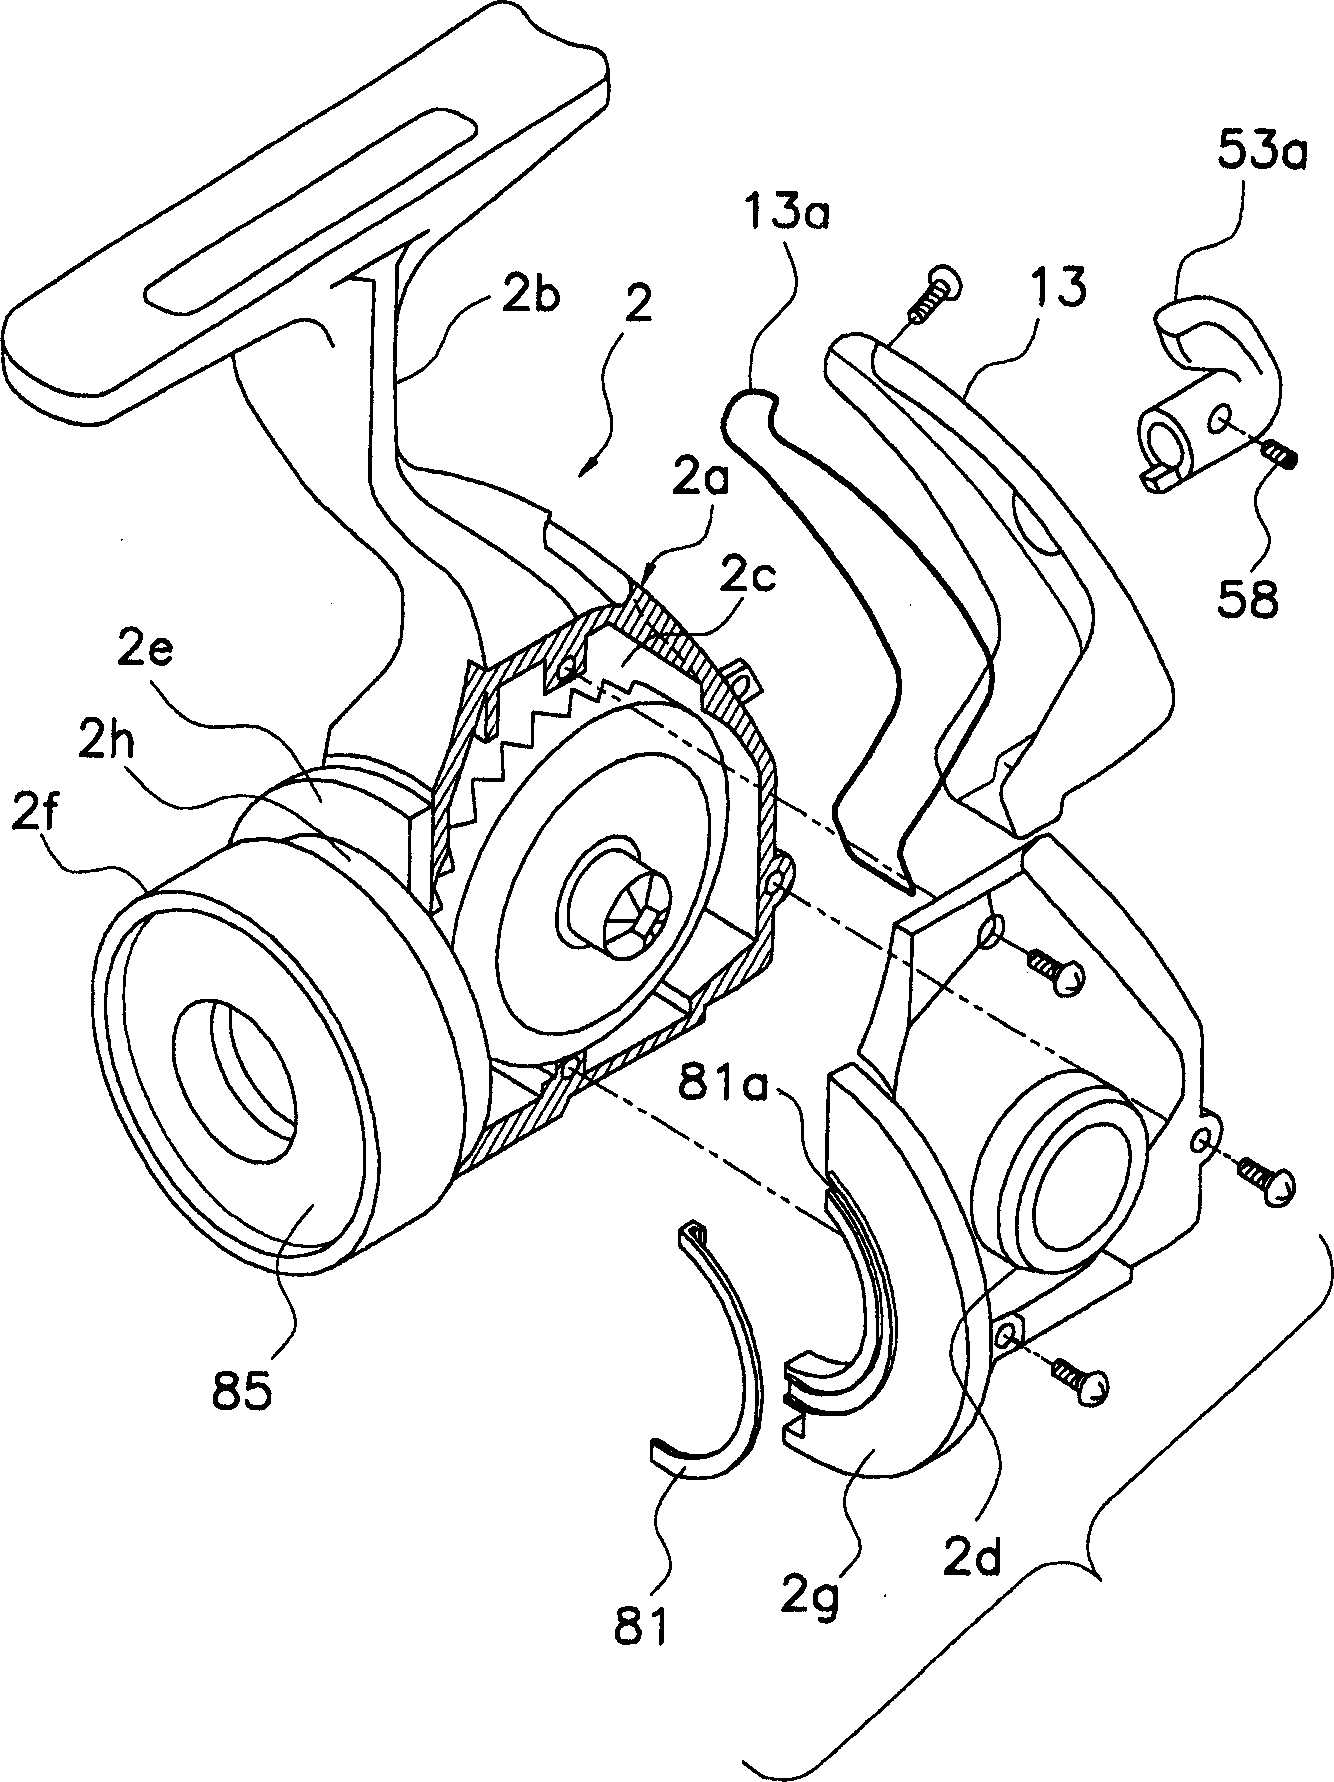 Rotor of rotating wire winder